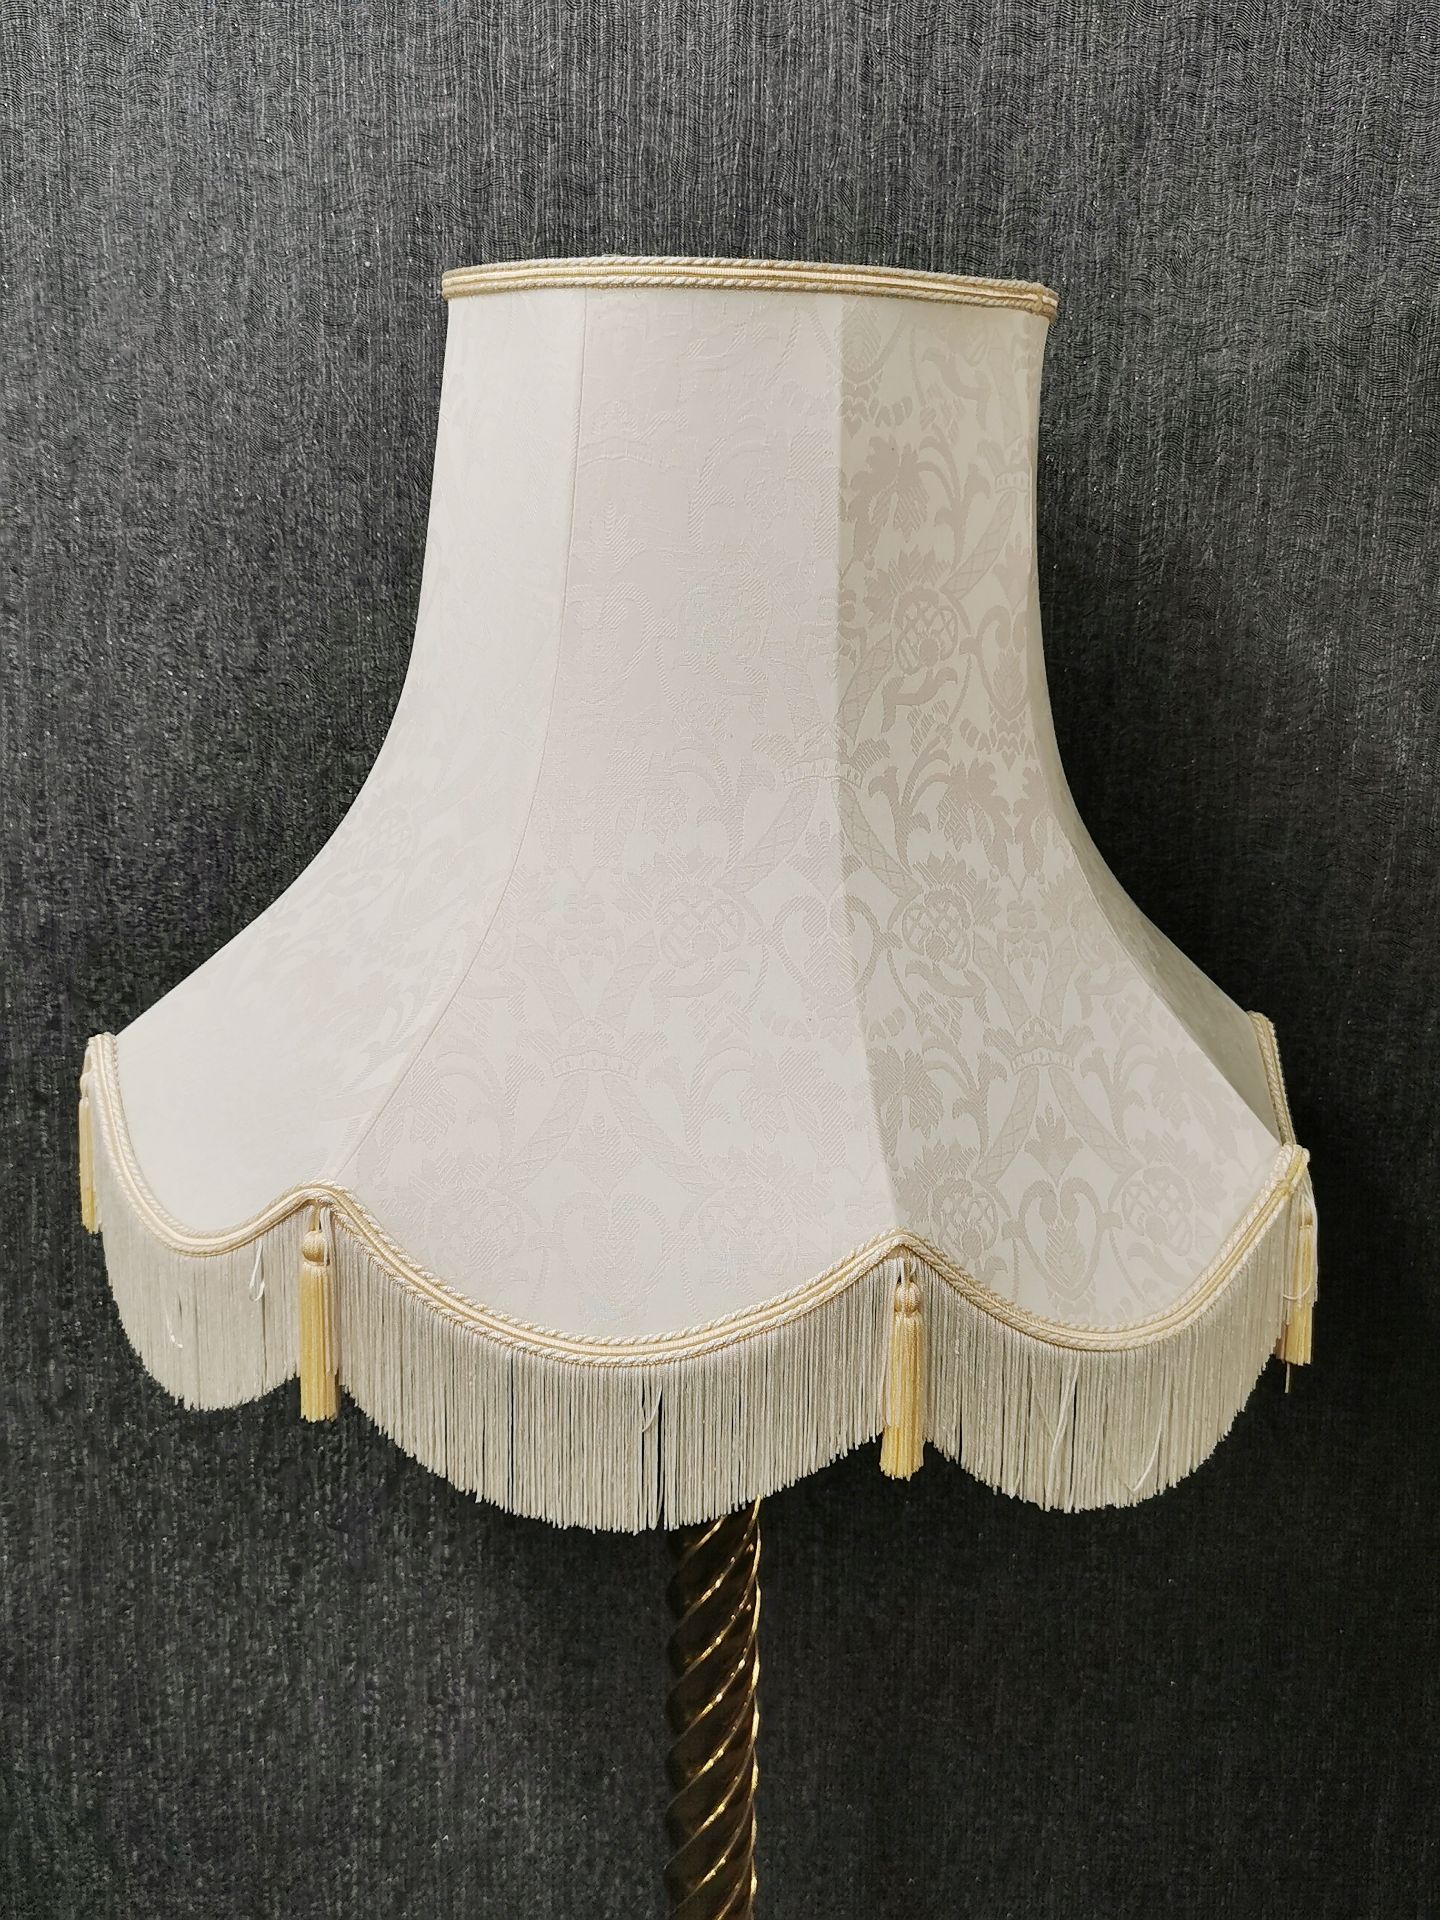 A brass spiral standard lamp and shade, H. 169cm. - Image 3 of 3